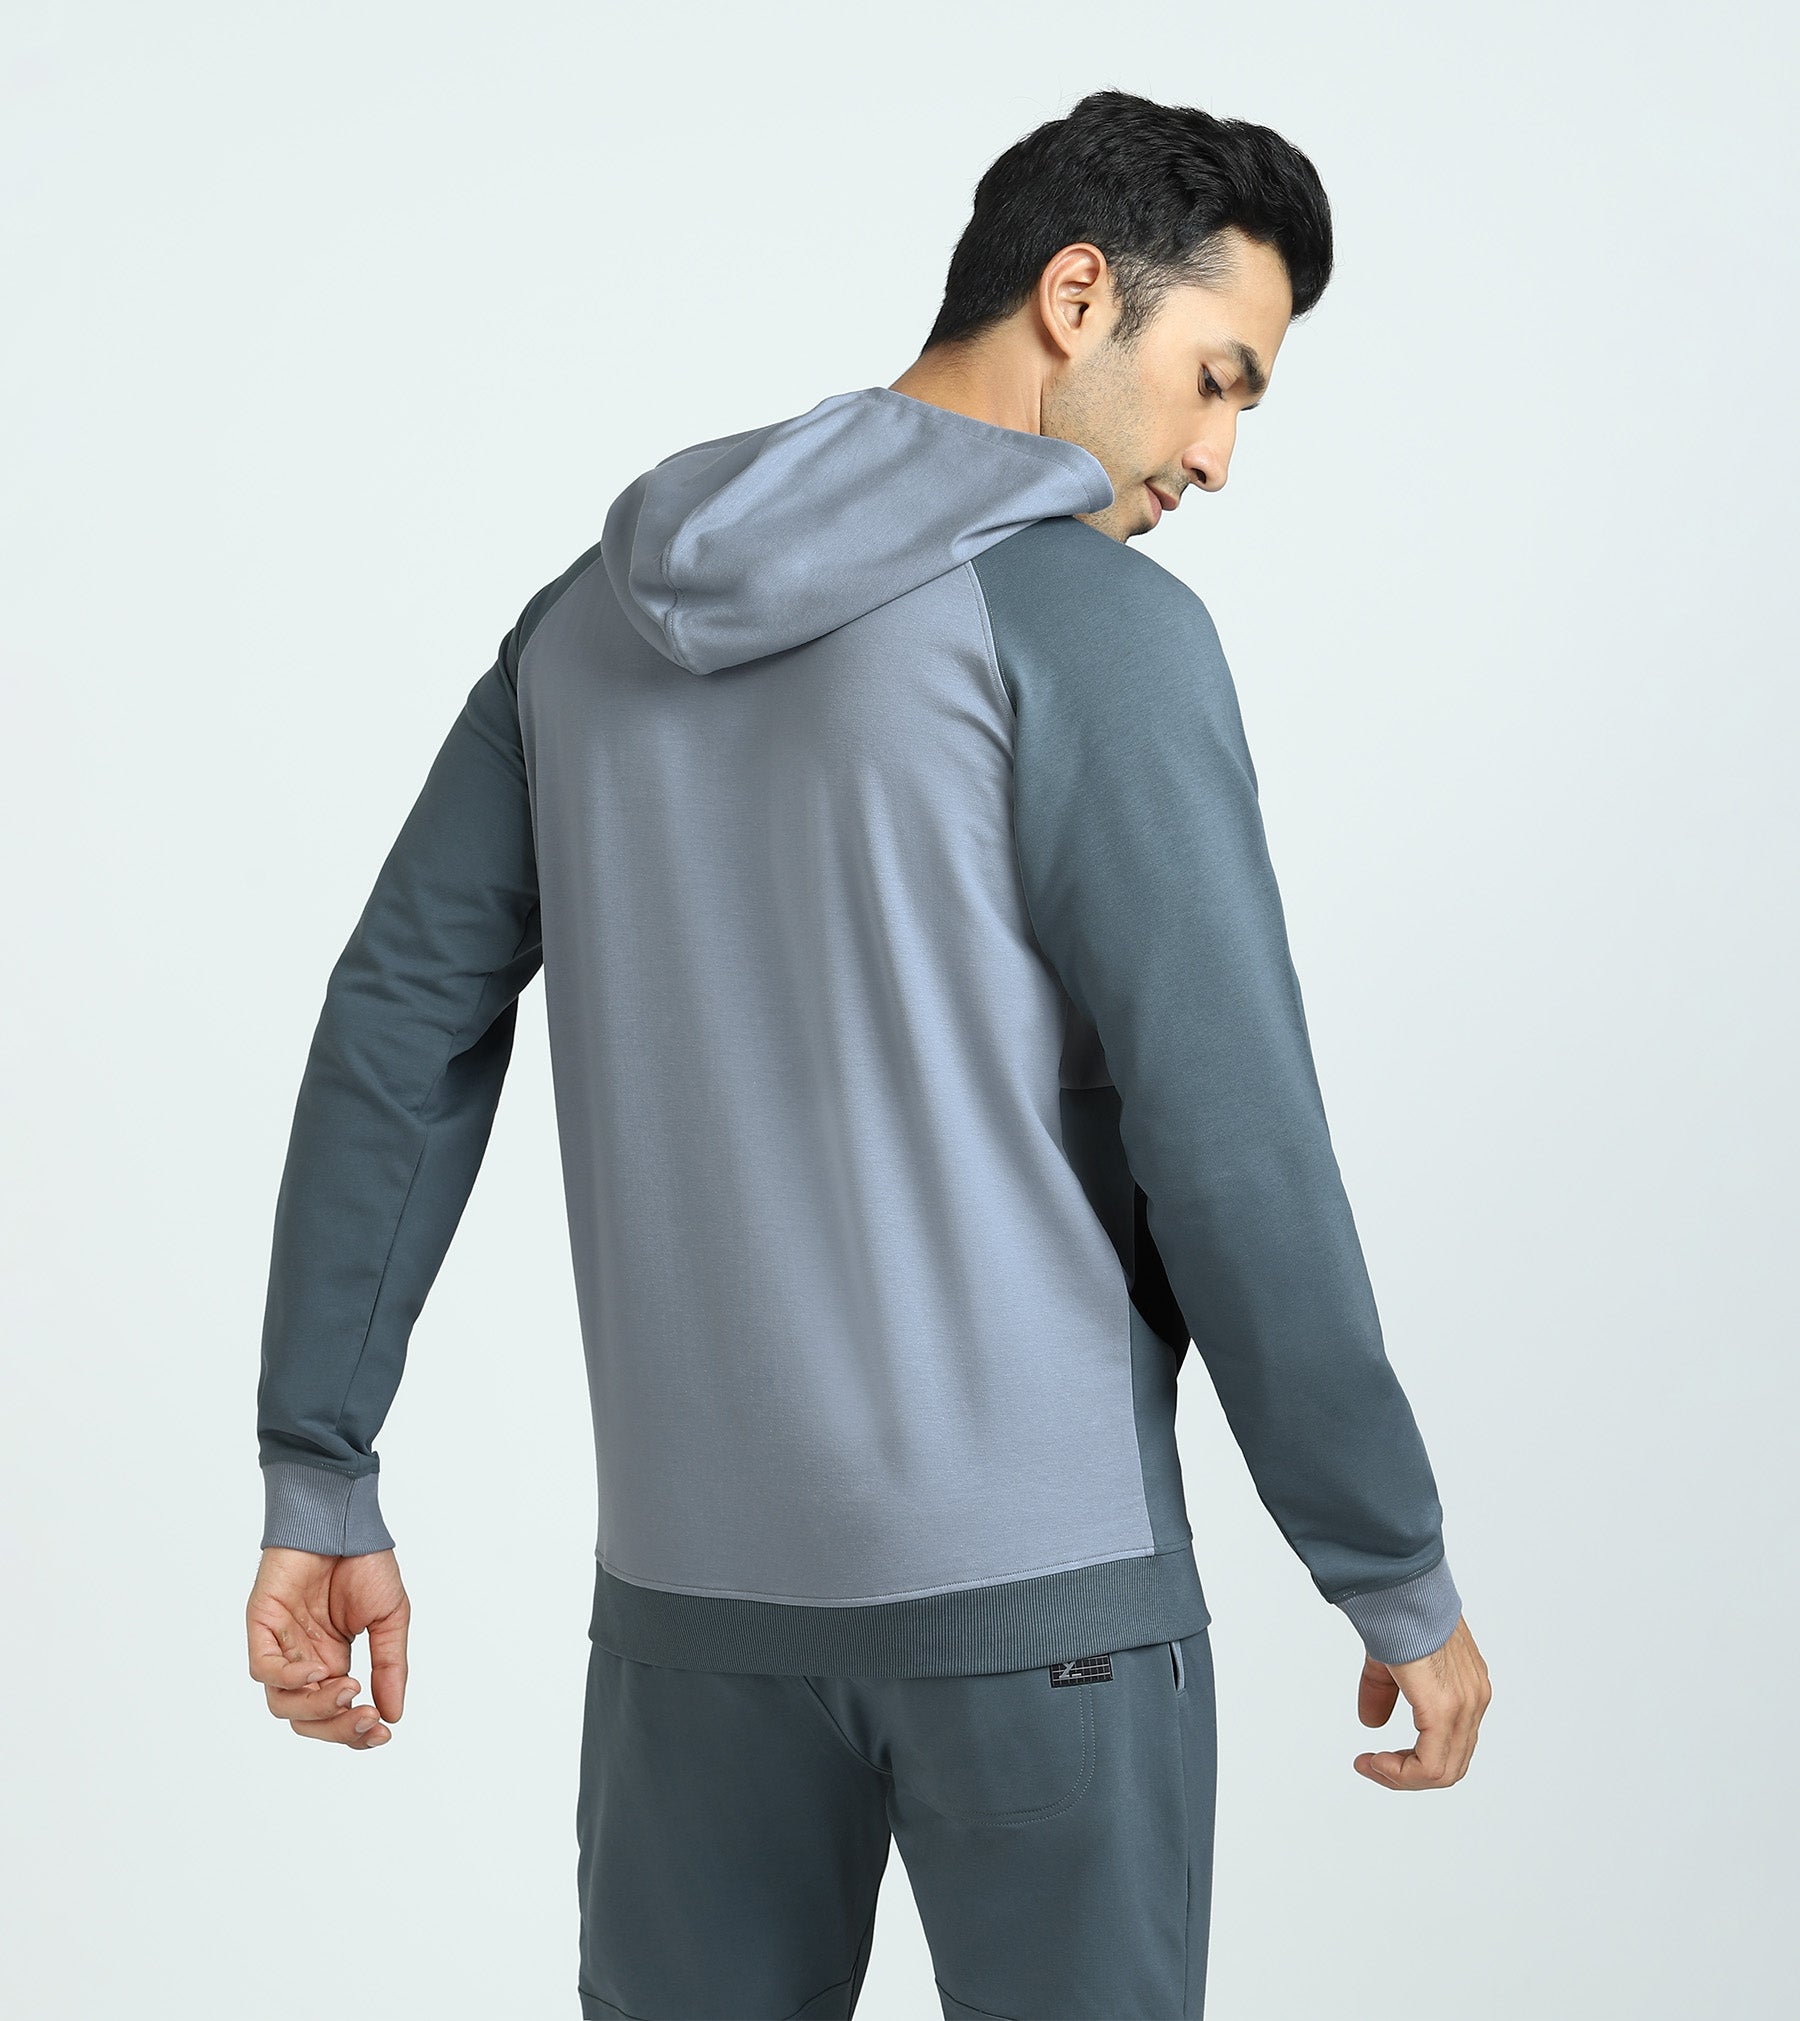 Quest French Terry Cotton-Blend Hoodies Set For Men Slate Grey - XYXX Mens Apparels